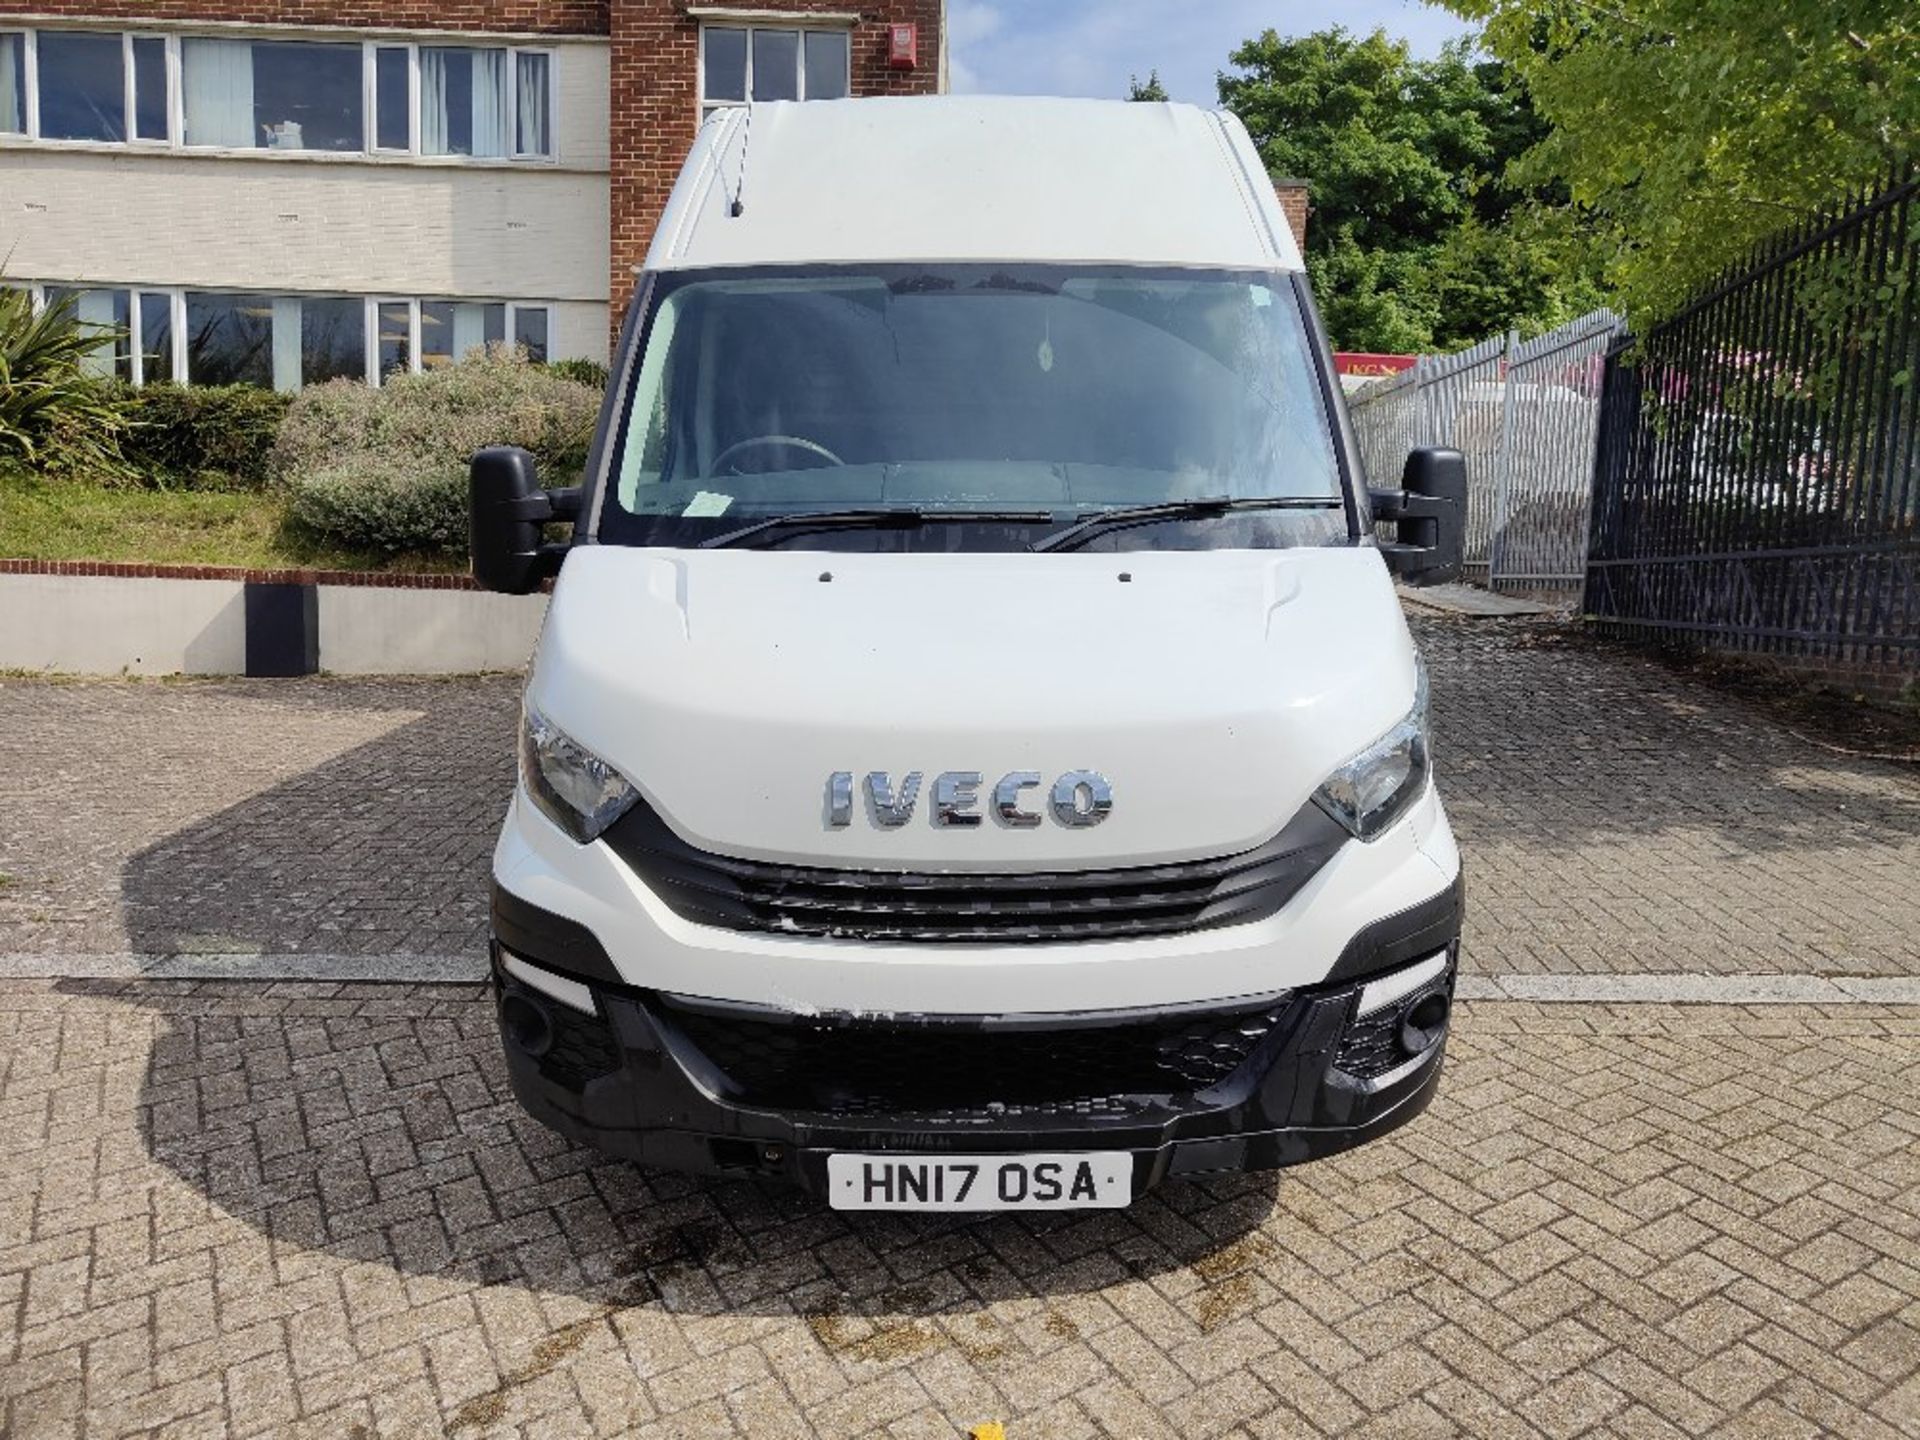 Iveco Daily 3520 WB 2.3D 35S14 High Roof Van - Image 2 of 23